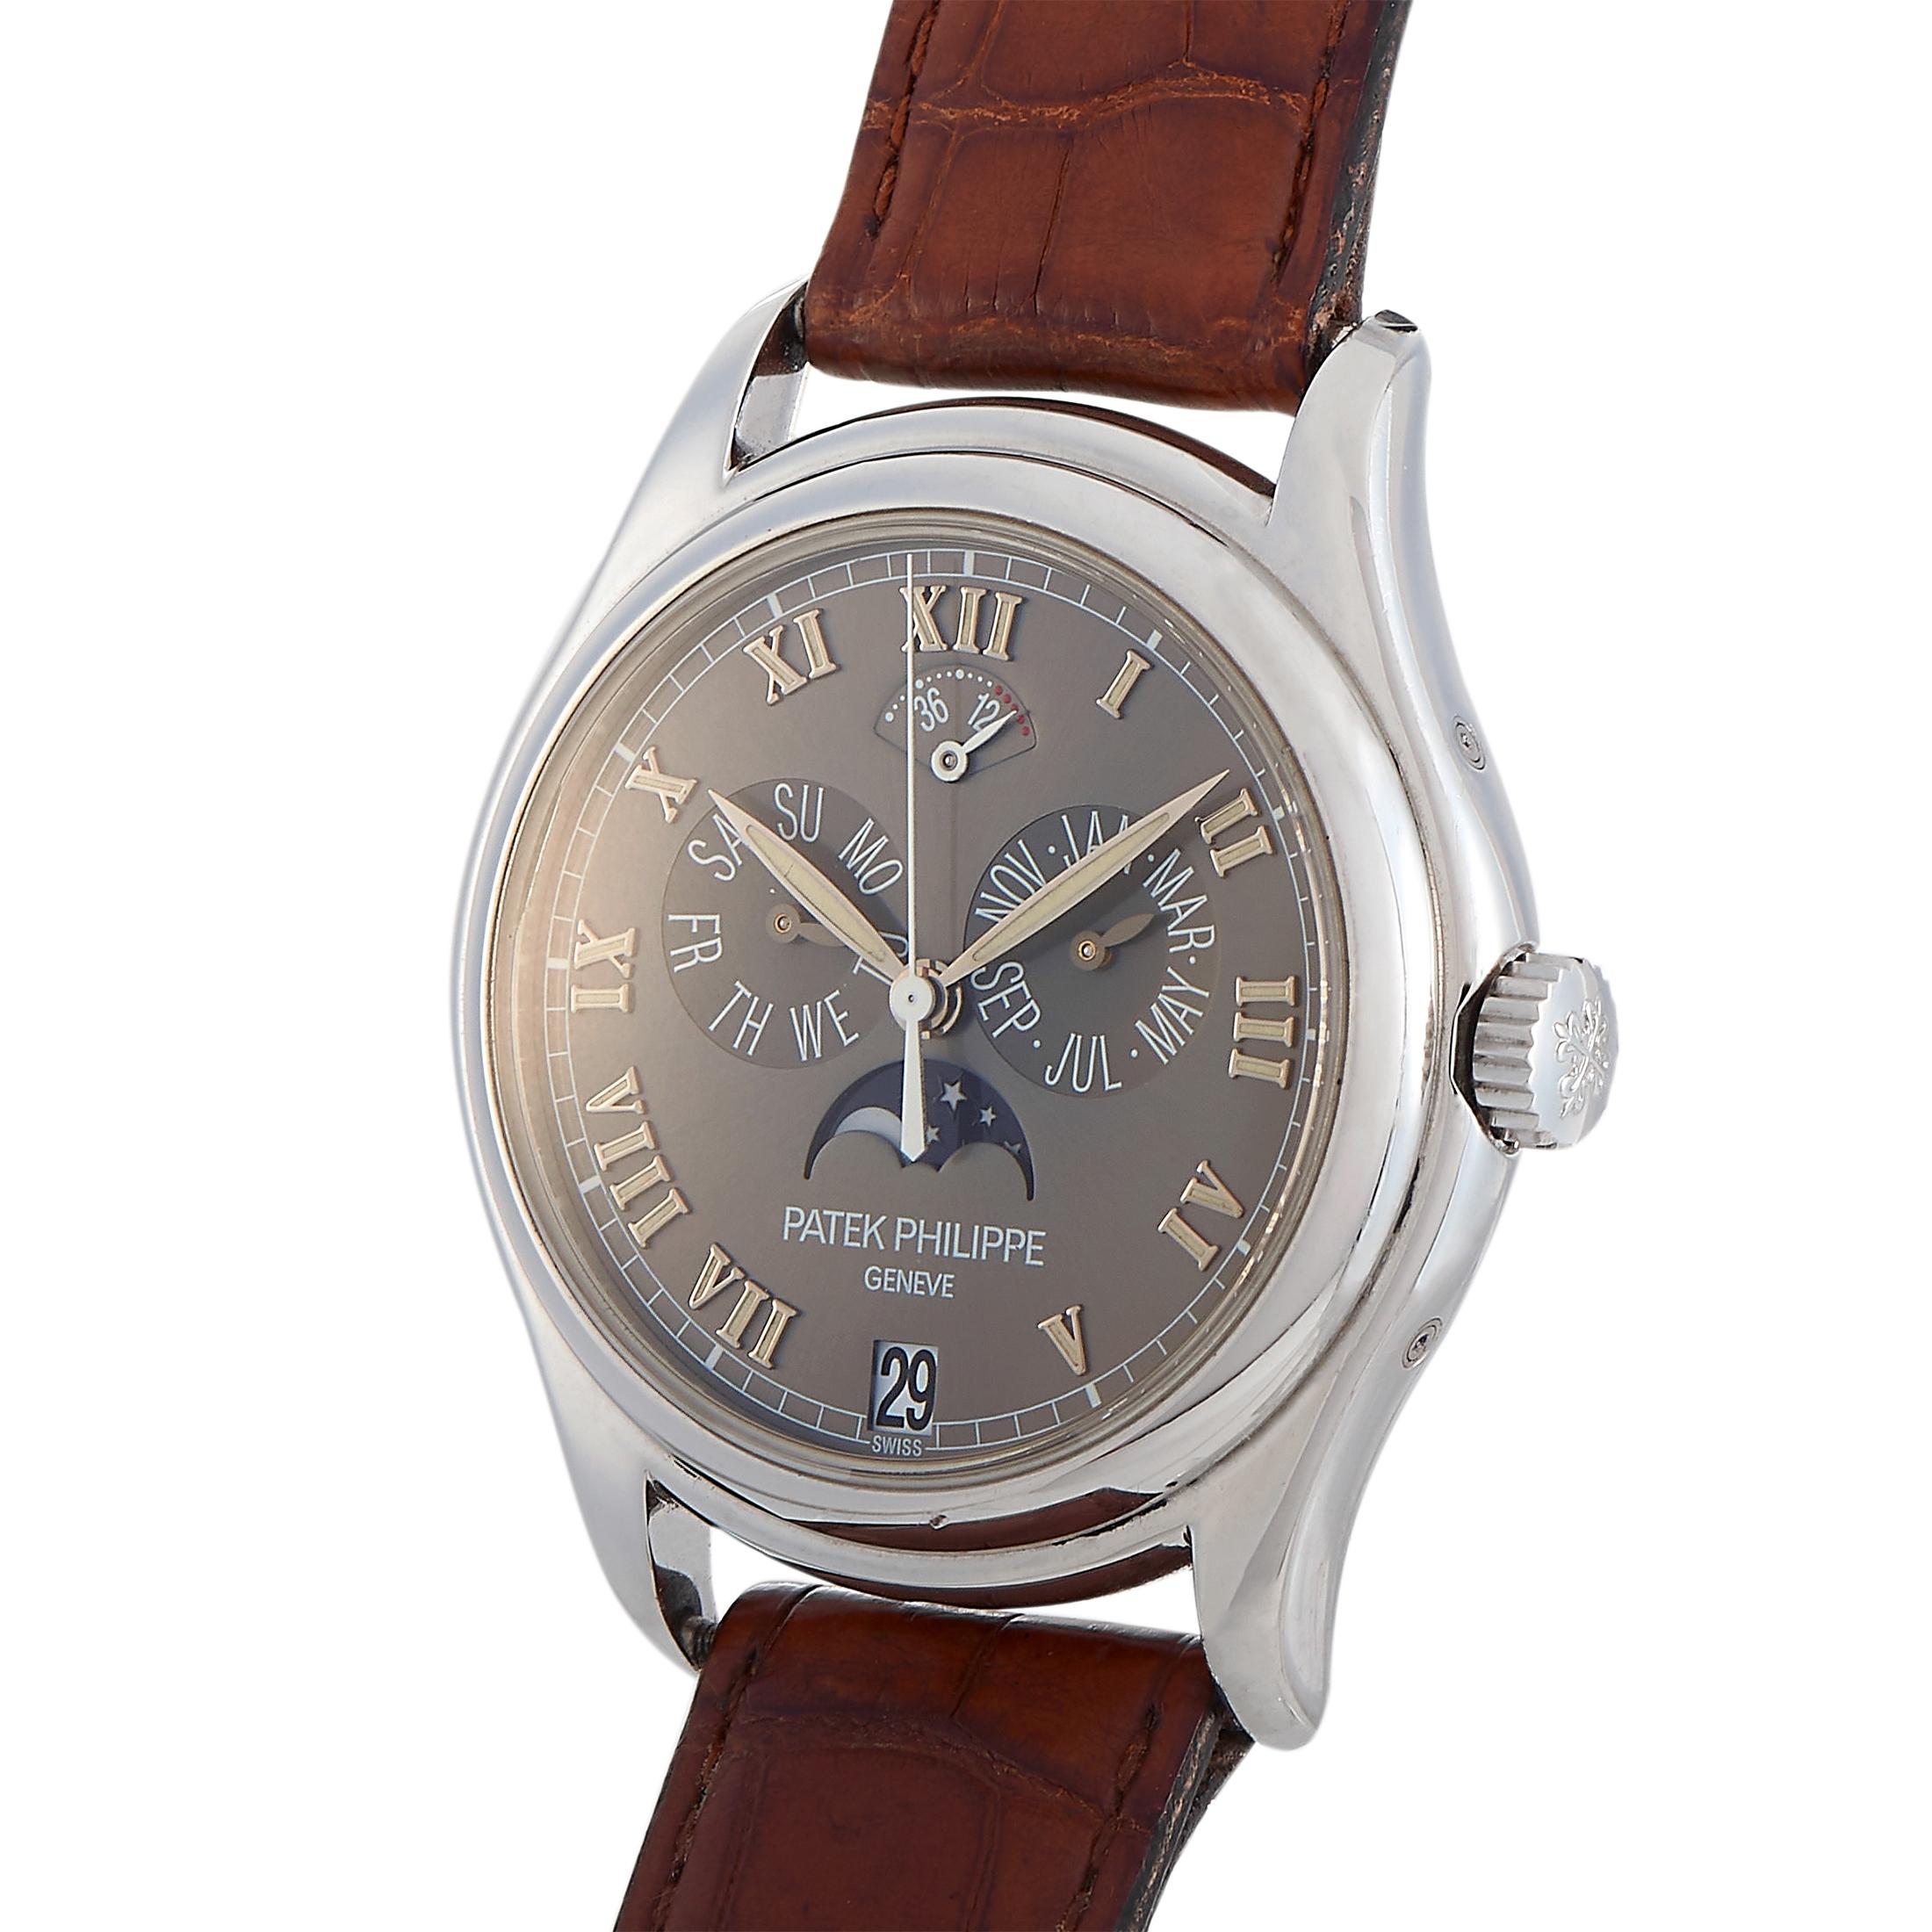 This is the Patek Philippe Annual Calendar, reference number 5056P.
 
 The watch is presented with a 37 mm platinum case that boasts see-through back. The case is mounted onto a brown leather strap fitted with a tang buckle. This model is equipped